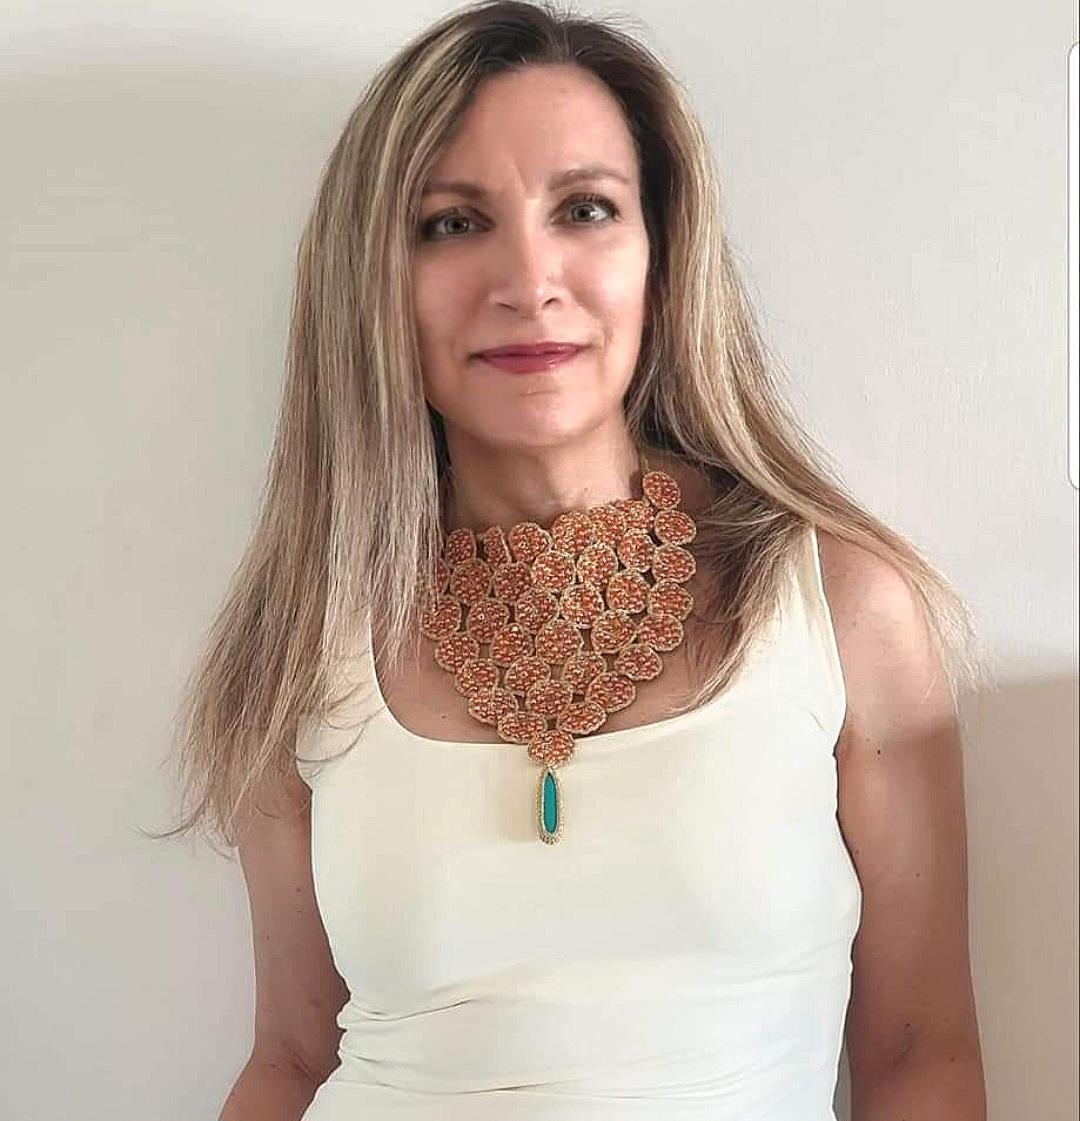 One of a kind hand crochet summery Necklace. This necklace is made out of circular patterns with Orange Glass Beads and a Howlite stone. It is a conversation starter. A statement Necklace. Bold and young. Golden smooth passing thread with no metal